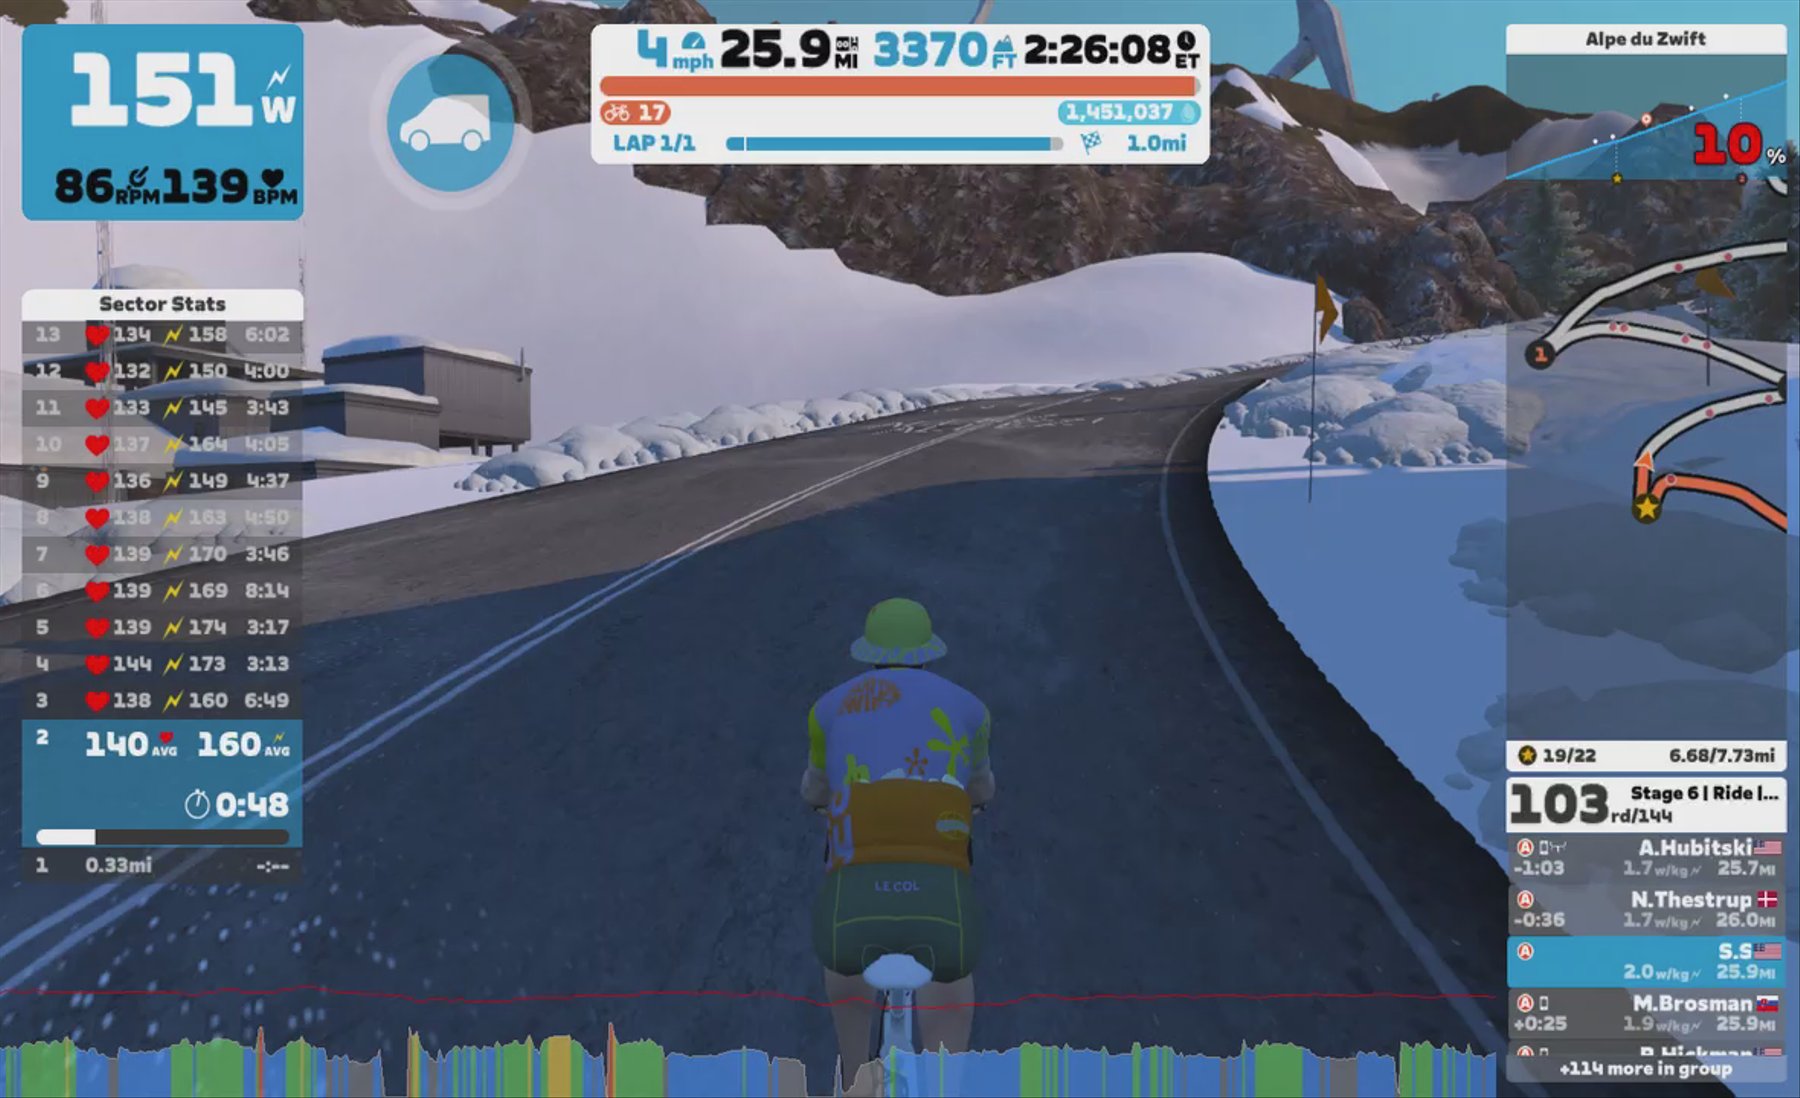 Zwift - Group Ride: Stage 6 | Ride | Tour de Zwift 2024 (A) on Accelerate to Elevate in Watopia